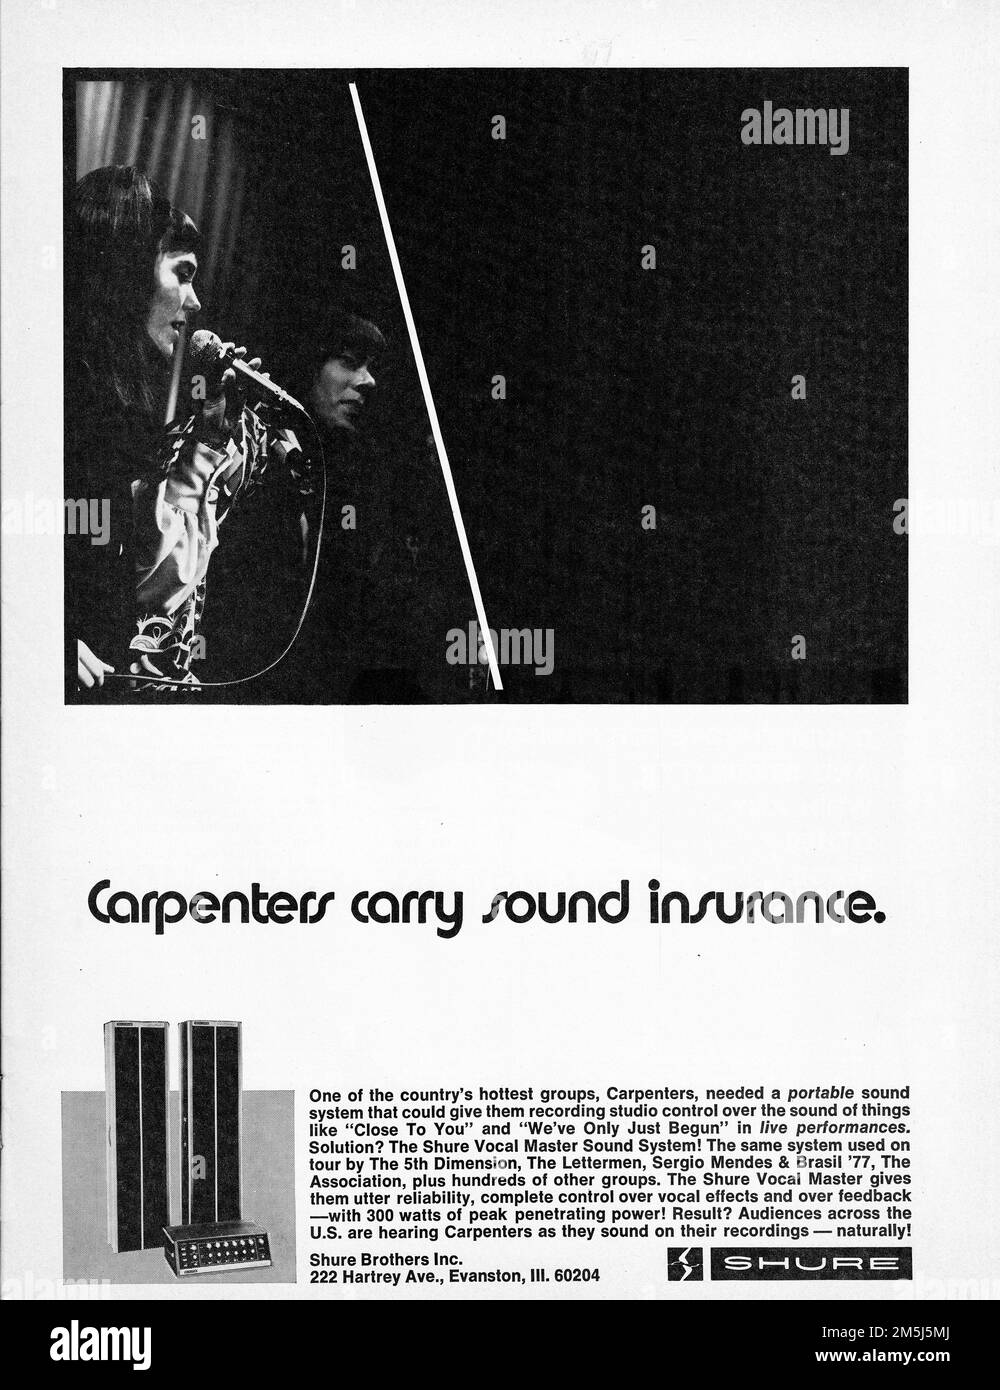 An advertisement for Sure microphones, amplifiers & speakers featuring the hot duo, The Carpenters. From a mid 1970s music periodical. Stock Photo